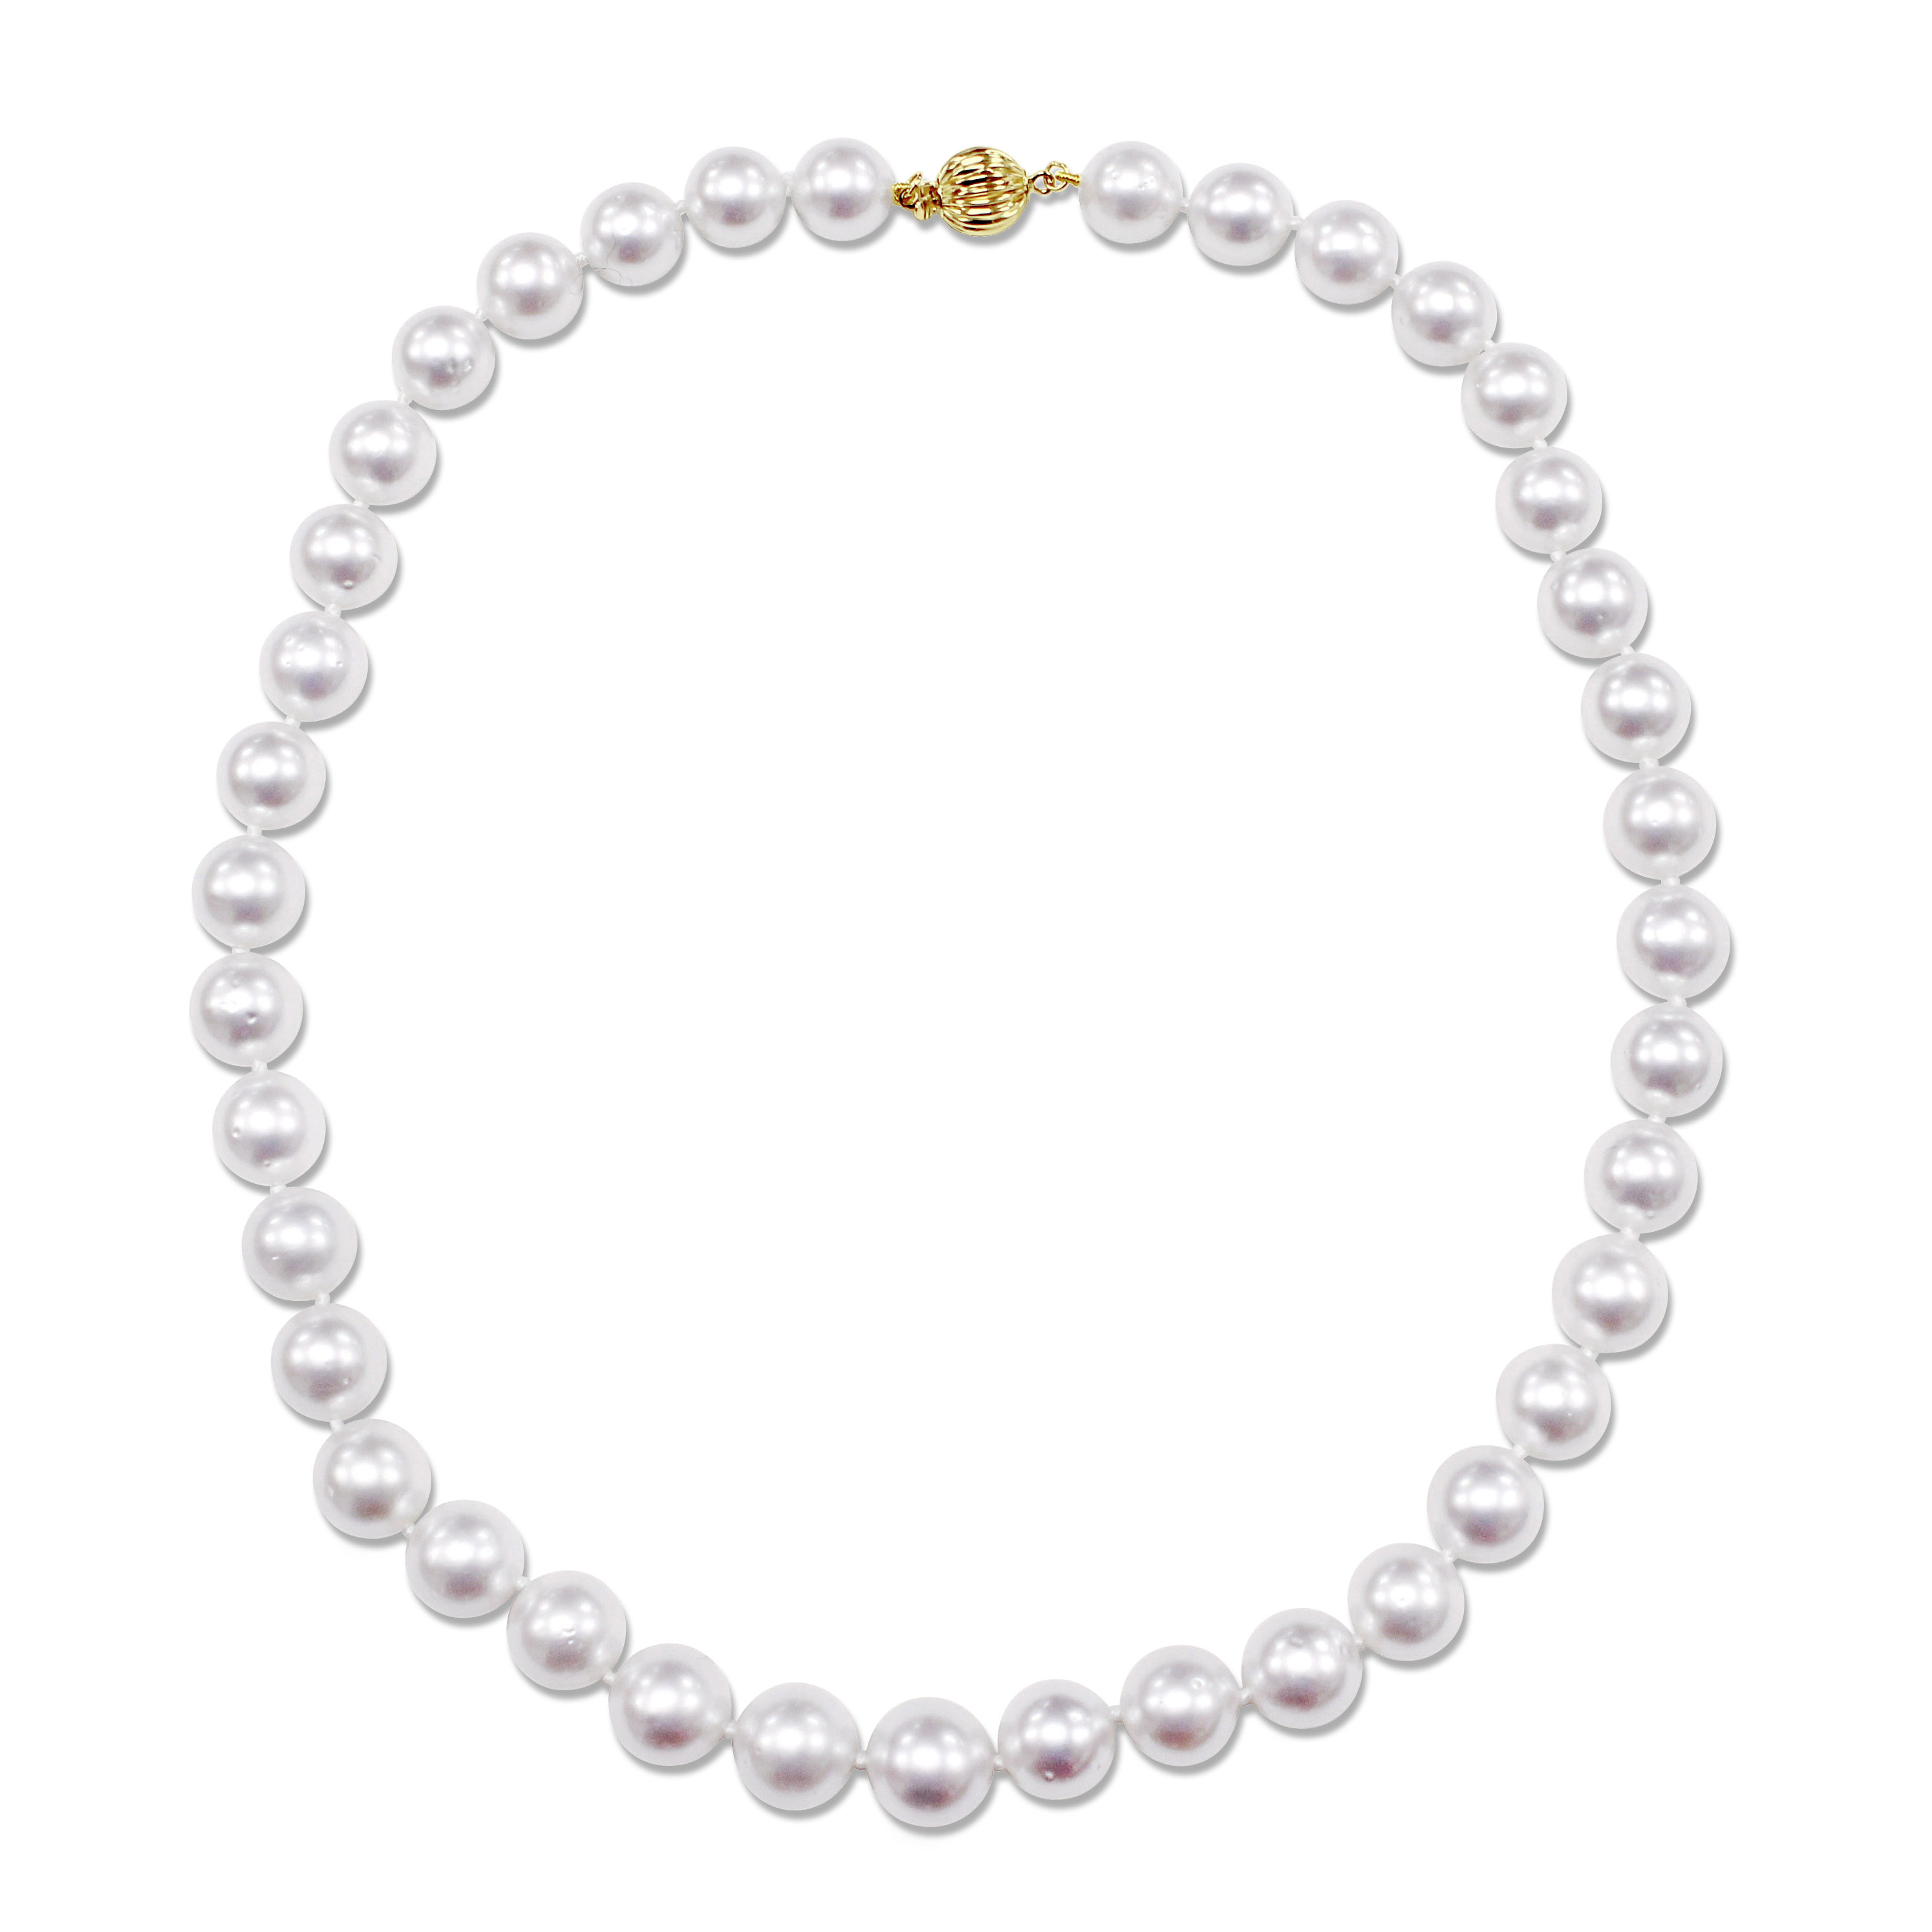 10 - 11.5 MM White South Sea Pearl Strand Necklace with 14k Yellow Gold Clasp - 18 in